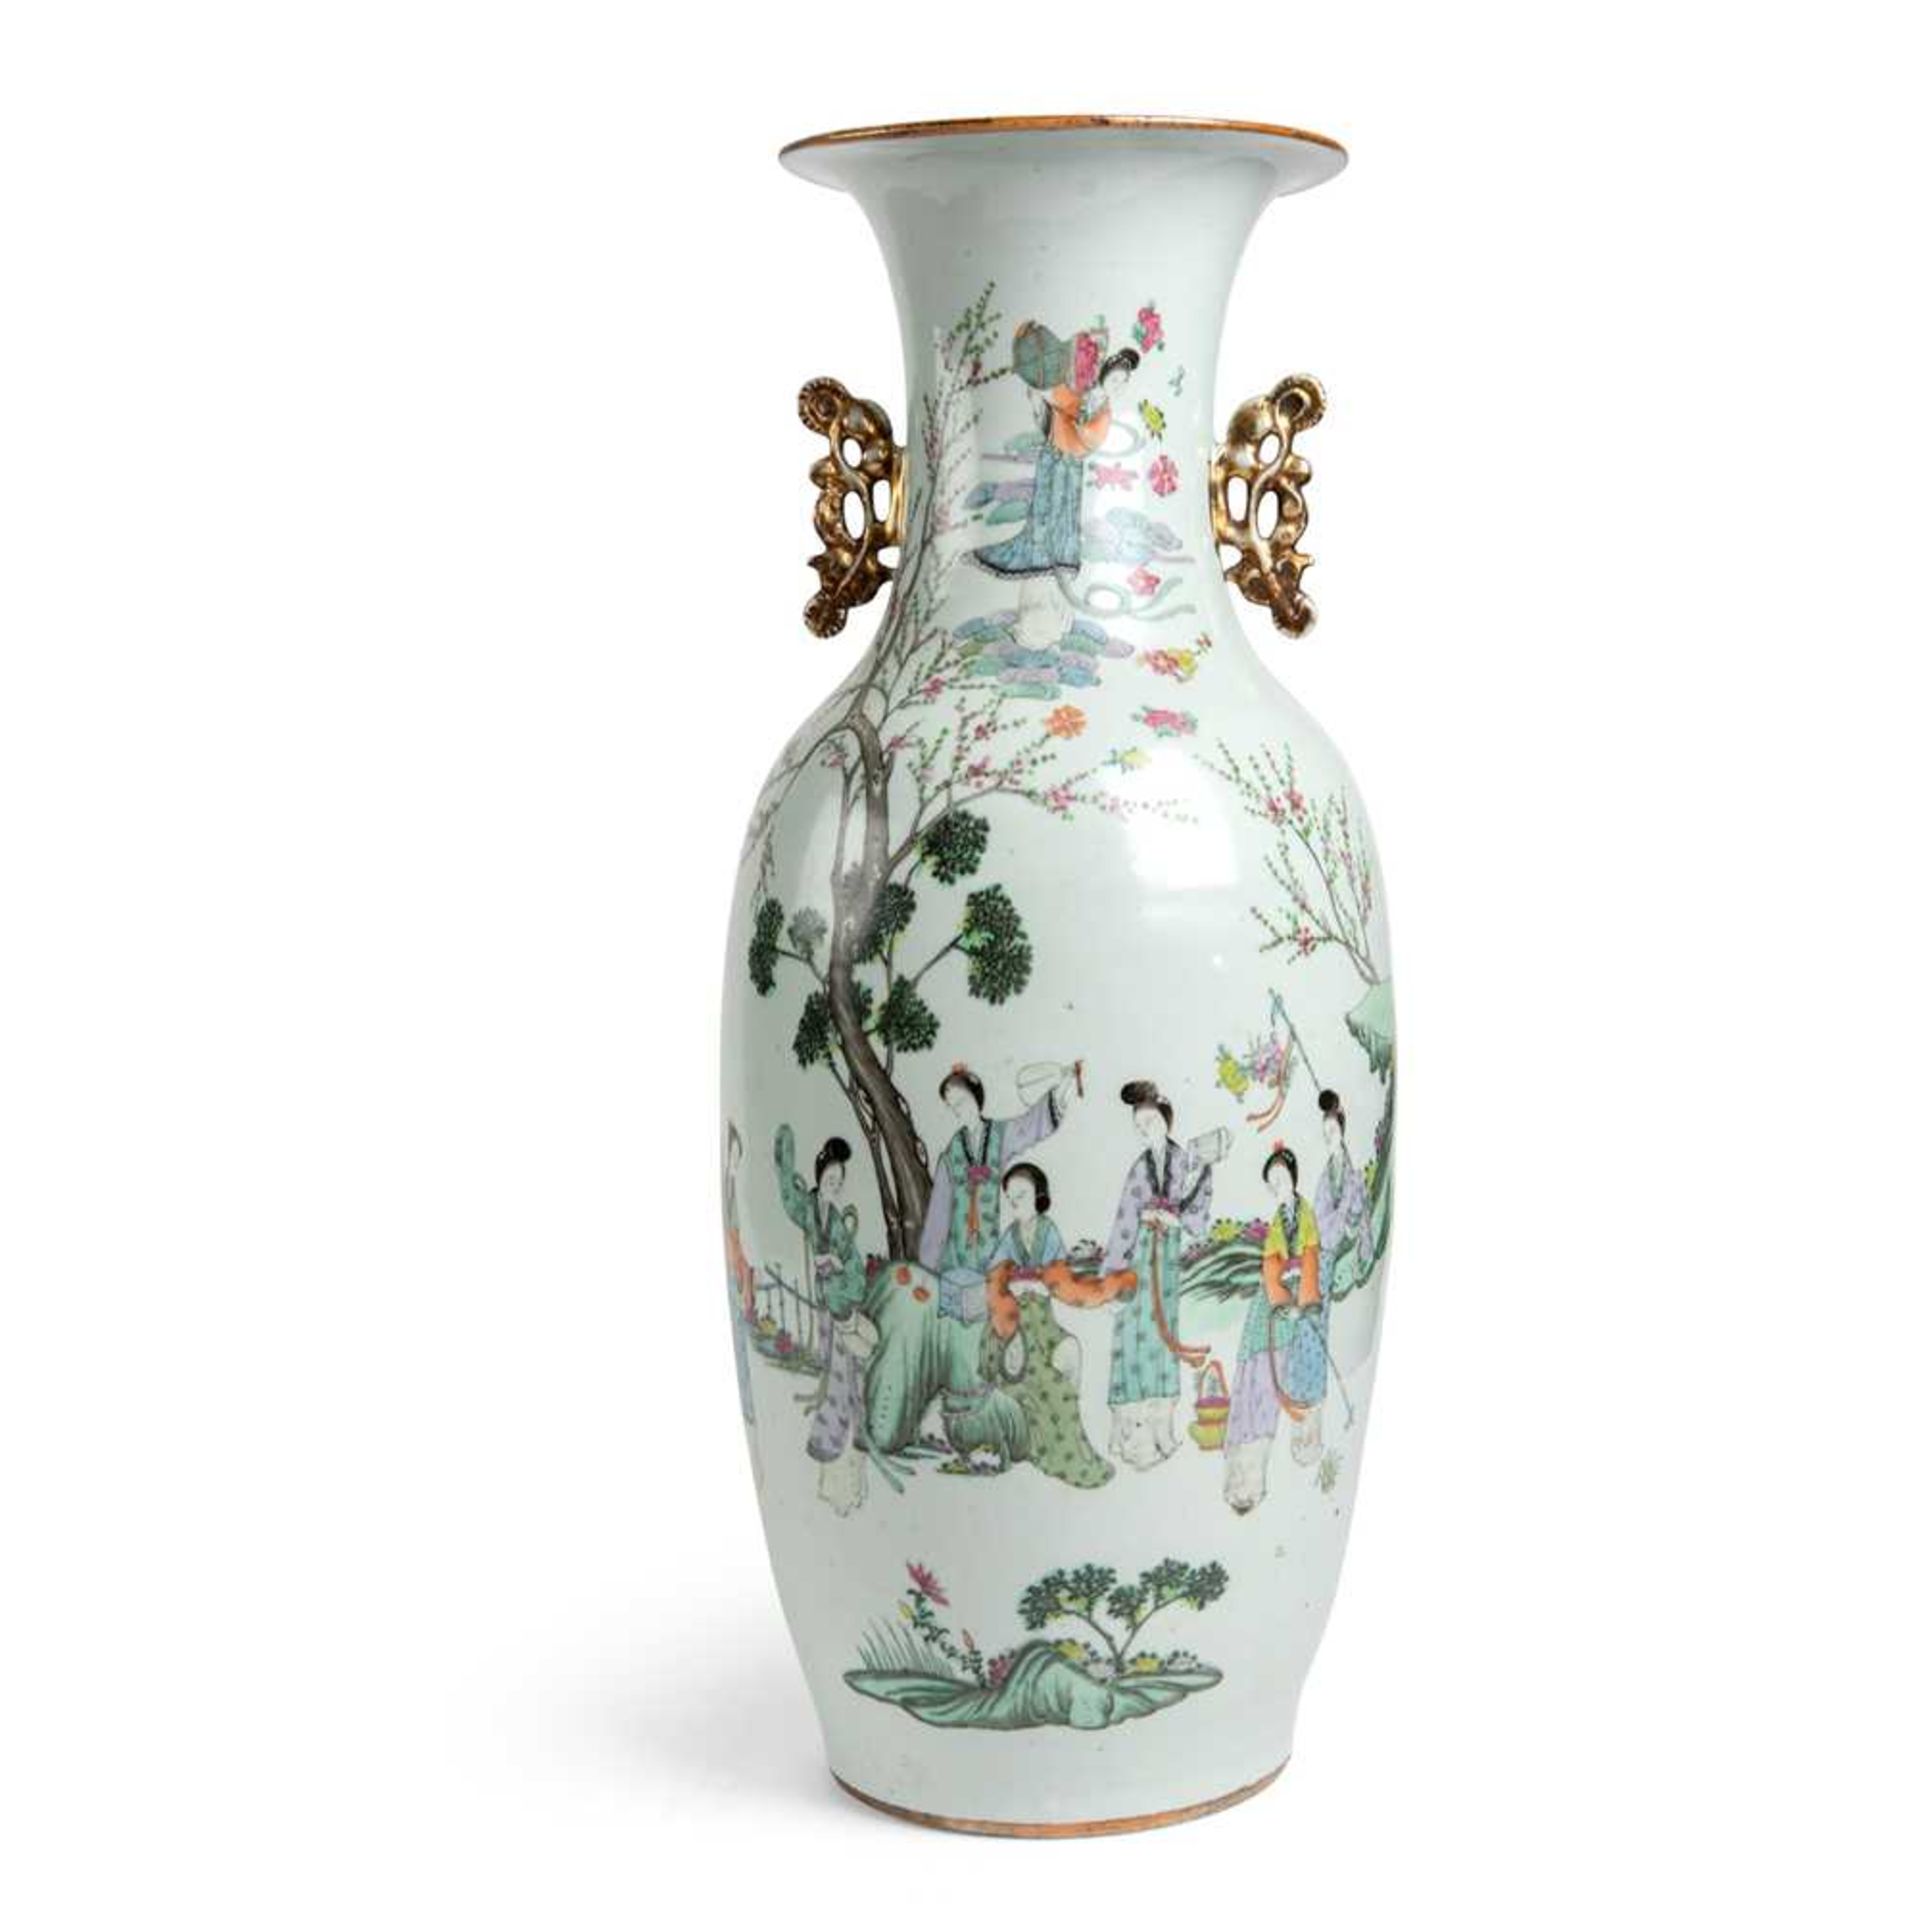 FAMILLE ROSE 'LADIES AT PLAY' VASE LATE QING DYNASTY-REPUBLIC PERIOD, 19TH-20TH CENTURY